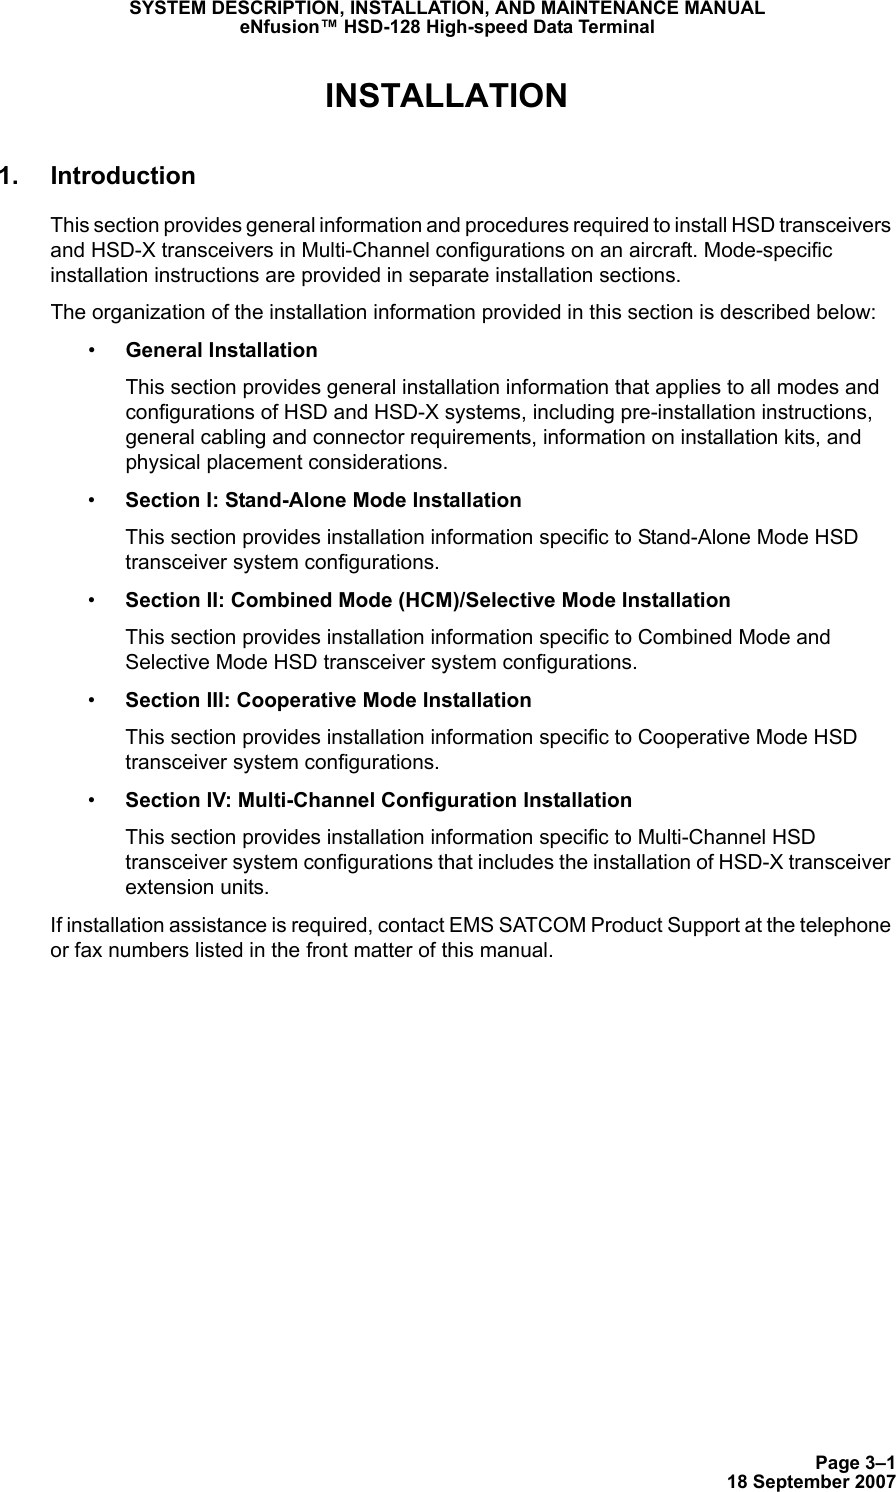 Page 3–118 September 2007SYSTEM DESCRIPTION, INSTALLATION, AND MAINTENANCE MANUALeNfusion™ HSD-128 High-speed Data TerminalINSTALLATION1. IntroductionThis section provides general information and procedures required to install HSD transceivers and HSD-X transceivers in Multi-Channel configurations on an aircraft. Mode-specific installation instructions are provided in separate installation sections. The organization of the installation information provided in this section is described below:•General InstallationThis section provides general installation information that applies to all modes and configurations of HSD and HSD-X systems, including pre-installation instructions, general cabling and connector requirements, information on installation kits, and physical placement considerations.•Section I: Stand-Alone Mode InstallationThis section provides installation information specific to Stand-Alone Mode HSD transceiver system configurations.•Section II: Combined Mode (HCM)/Selective Mode InstallationThis section provides installation information specific to Combined Mode and Selective Mode HSD transceiver system configurations.•Section III: Cooperative Mode InstallationThis section provides installation information specific to Cooperative Mode HSD transceiver system configurations.•Section IV: Multi-Channel Configuration InstallationThis section provides installation information specific to Multi-Channel HSD transceiver system configurations that includes the installation of HSD-X transceiver extension units.If installation assistance is required, contact EMS SATCOM Product Support at the telephone or fax numbers listed in the front matter of this manual.